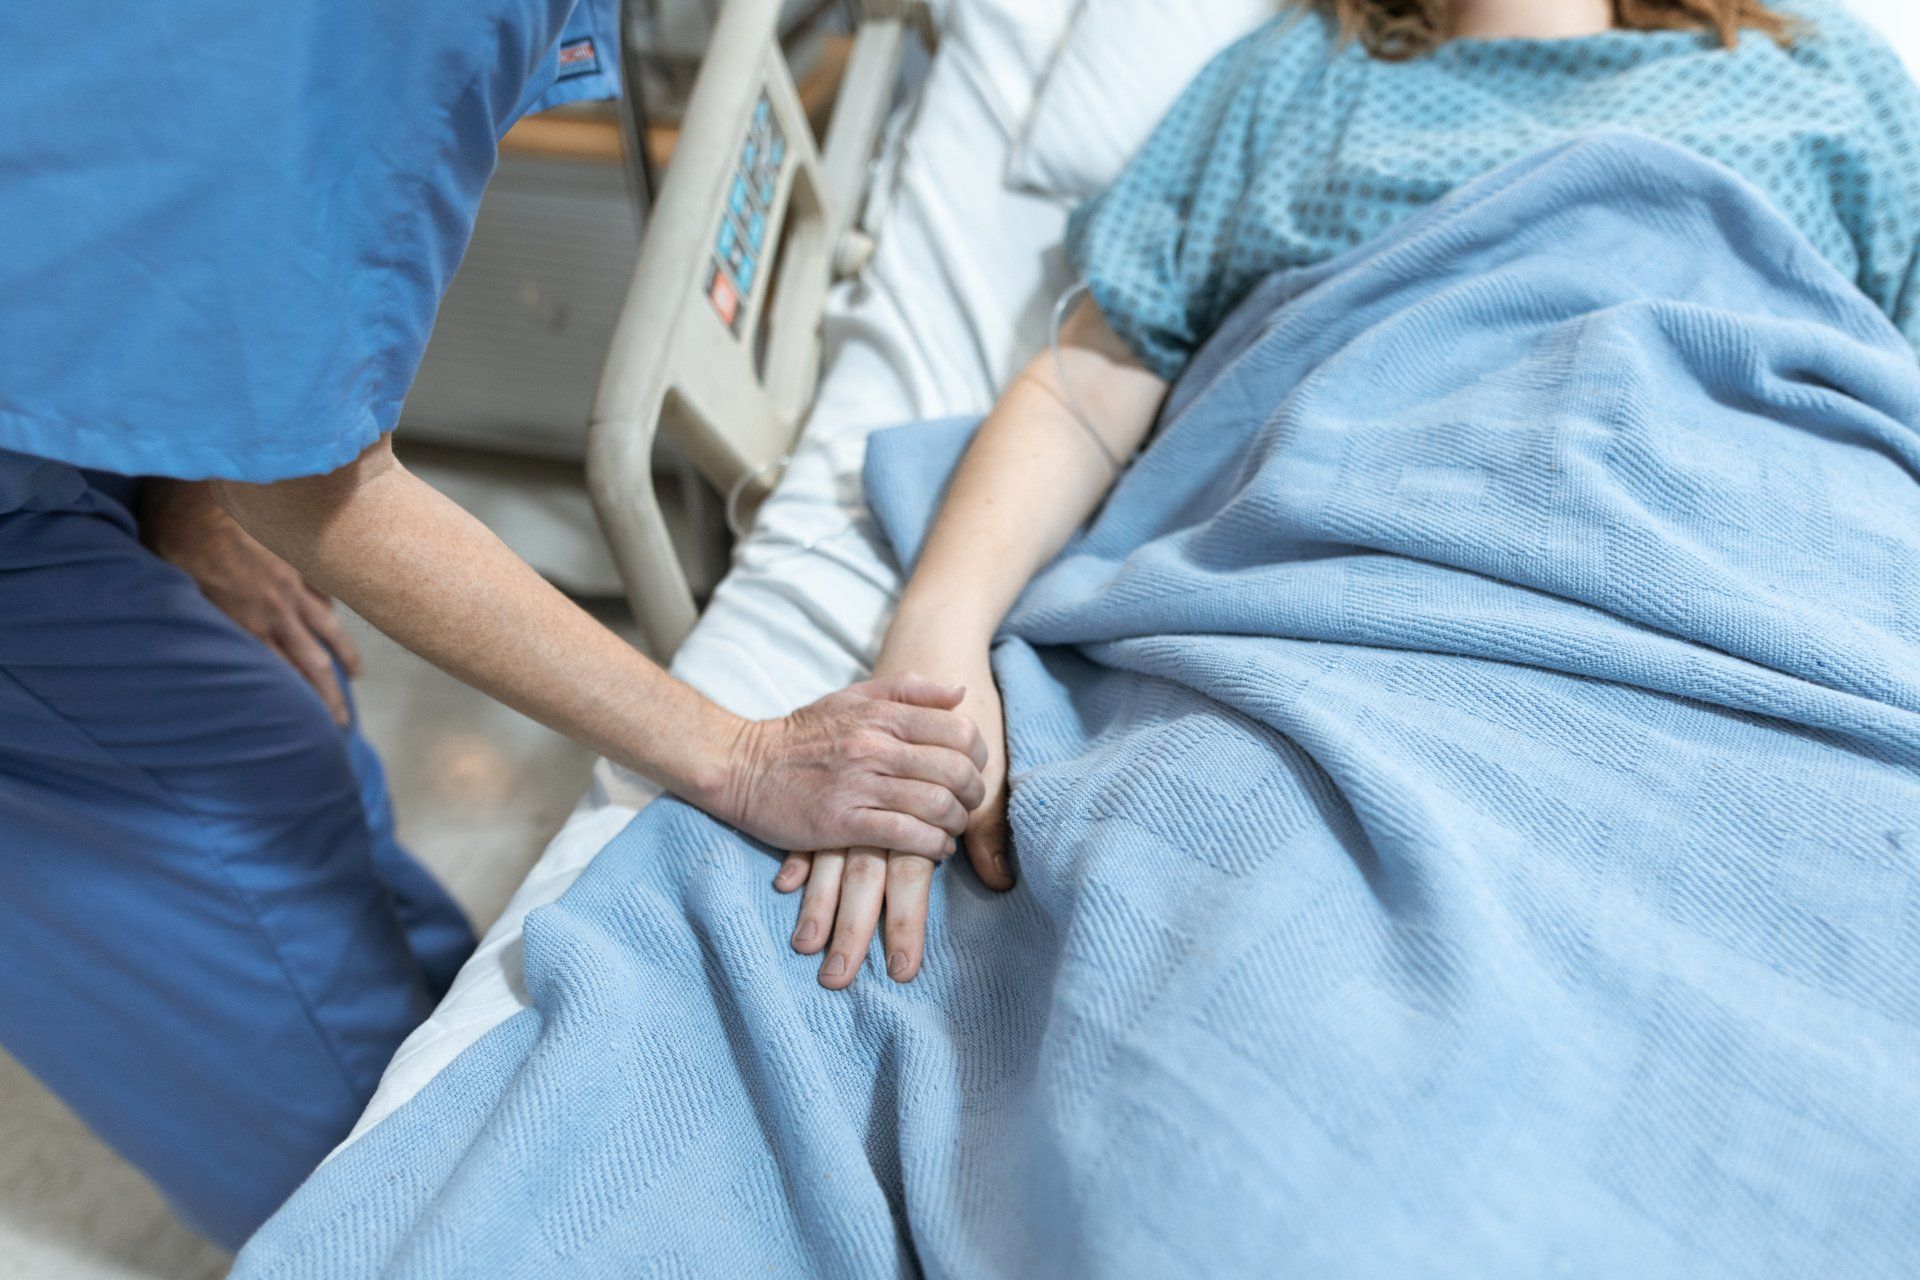 A nurse is holding the hand of a patient in a hospital bed.